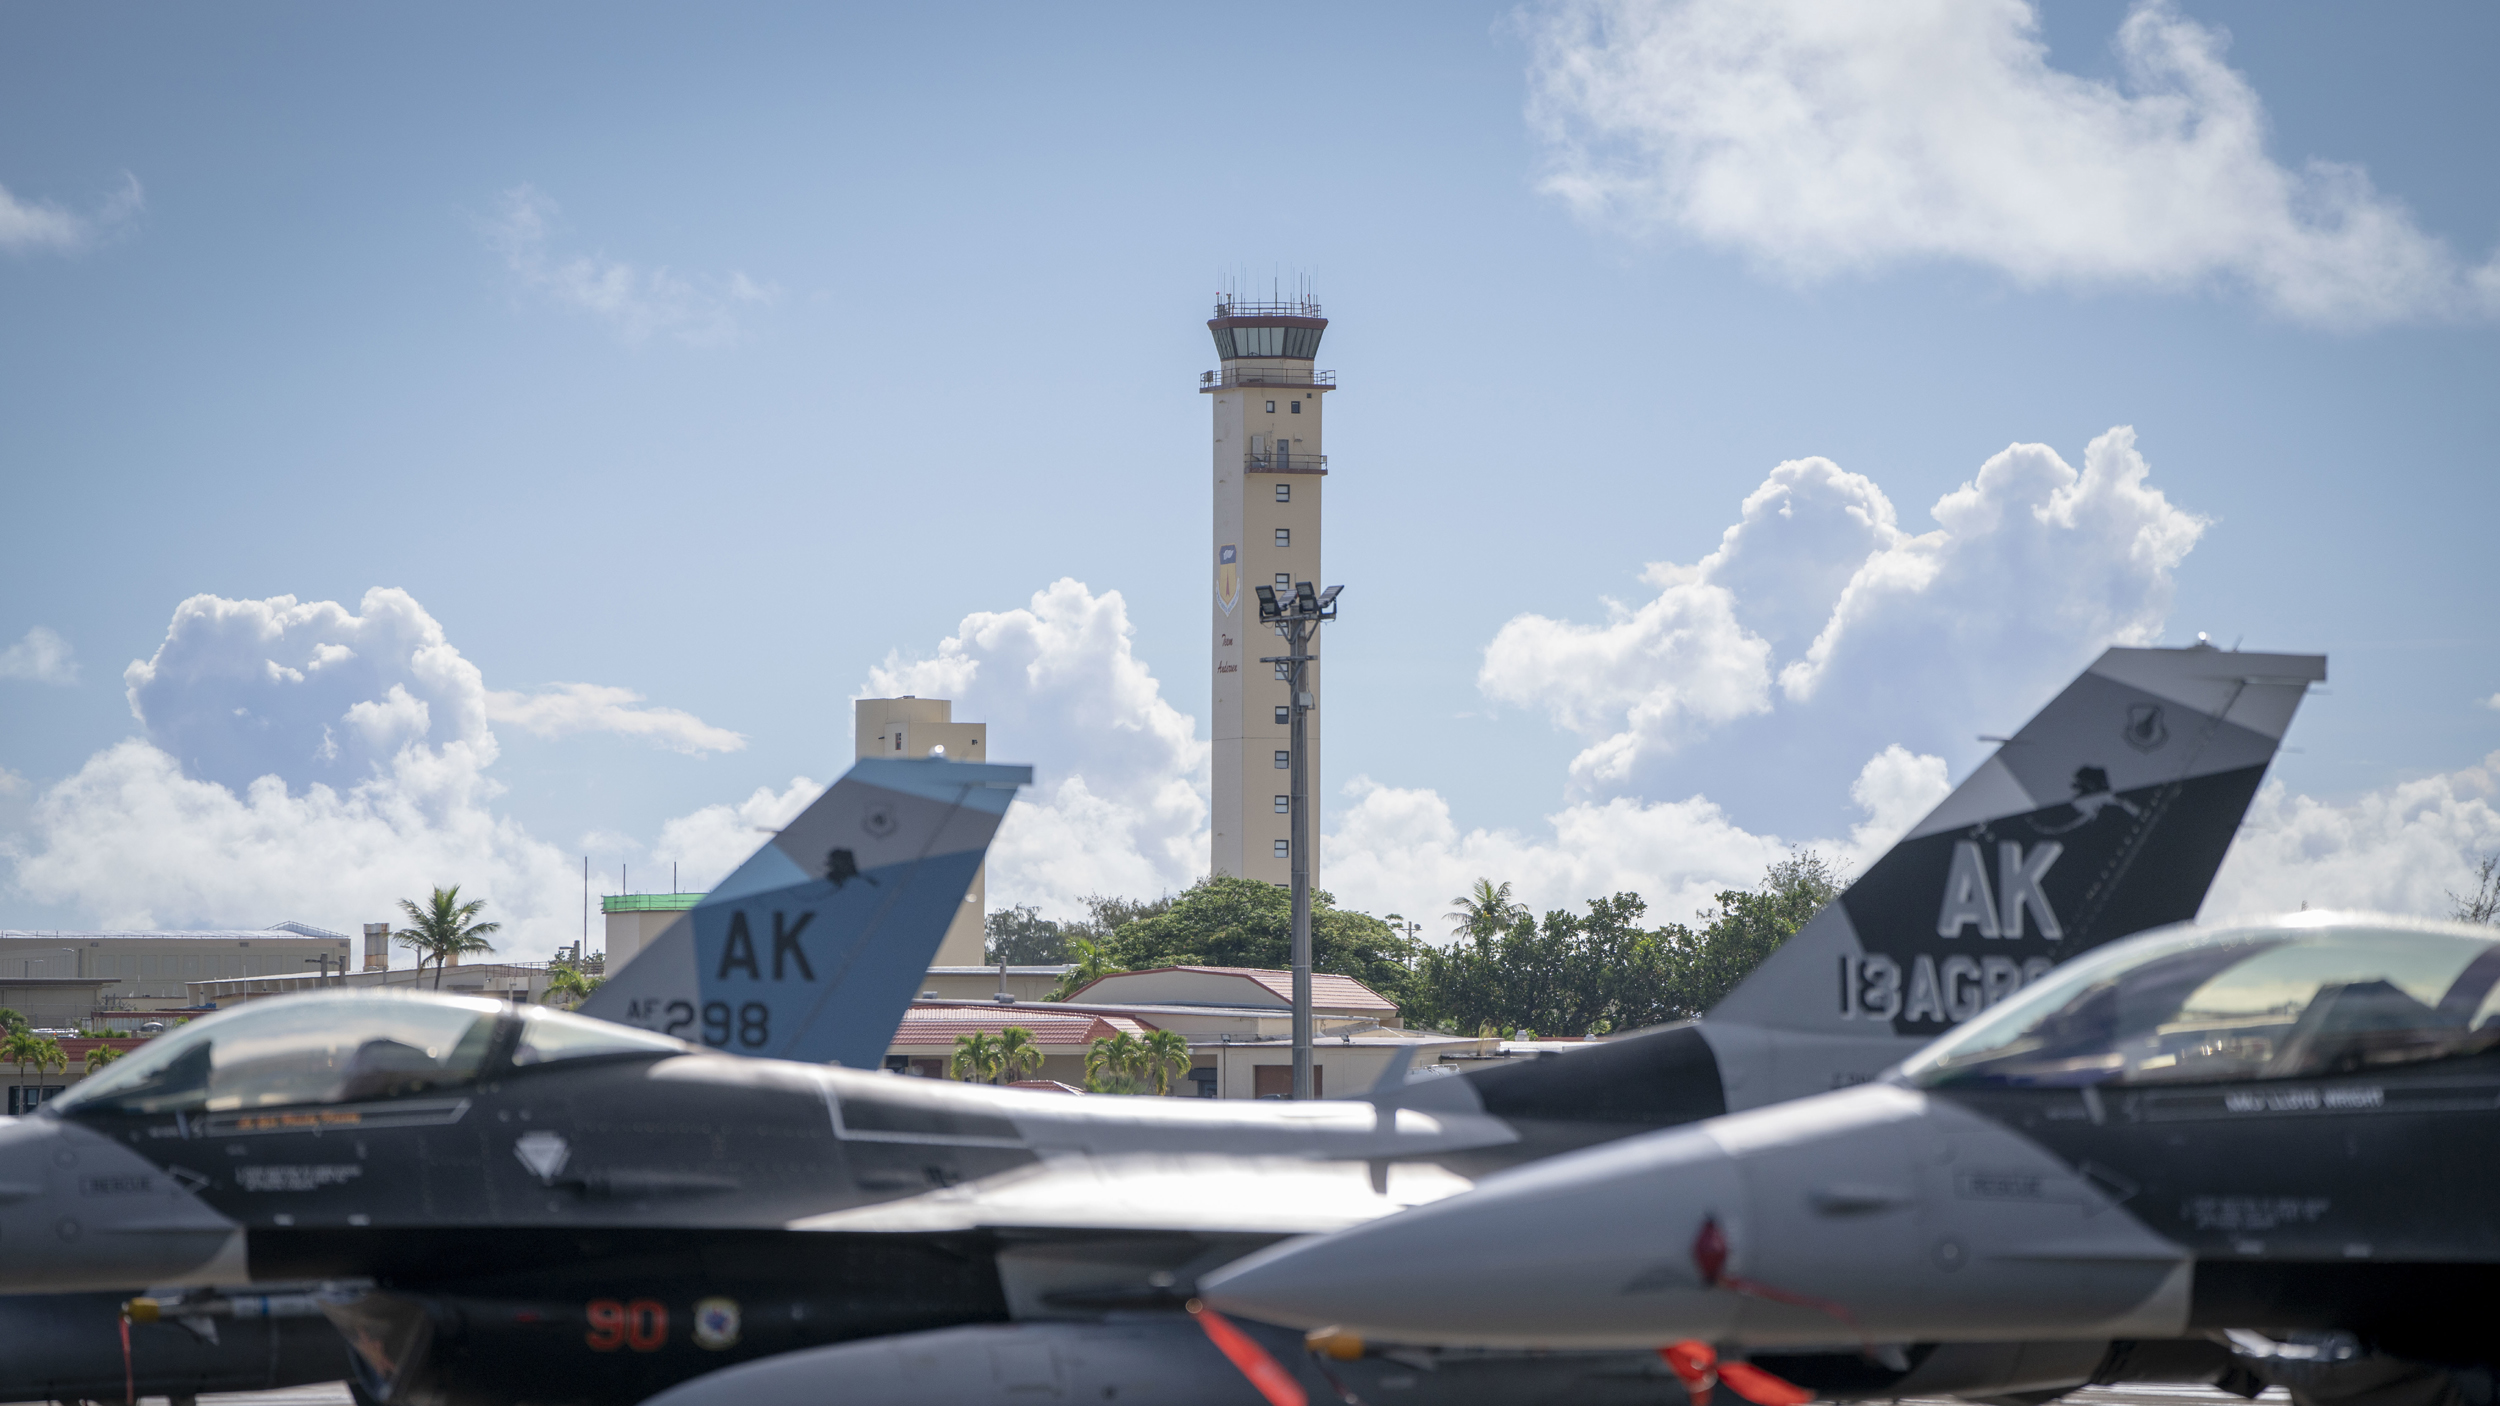 U.S. Air Force Aircraft • Exercise Valiant Shield • Andersen Air Force Base, Guam • Sept. 18, 2020